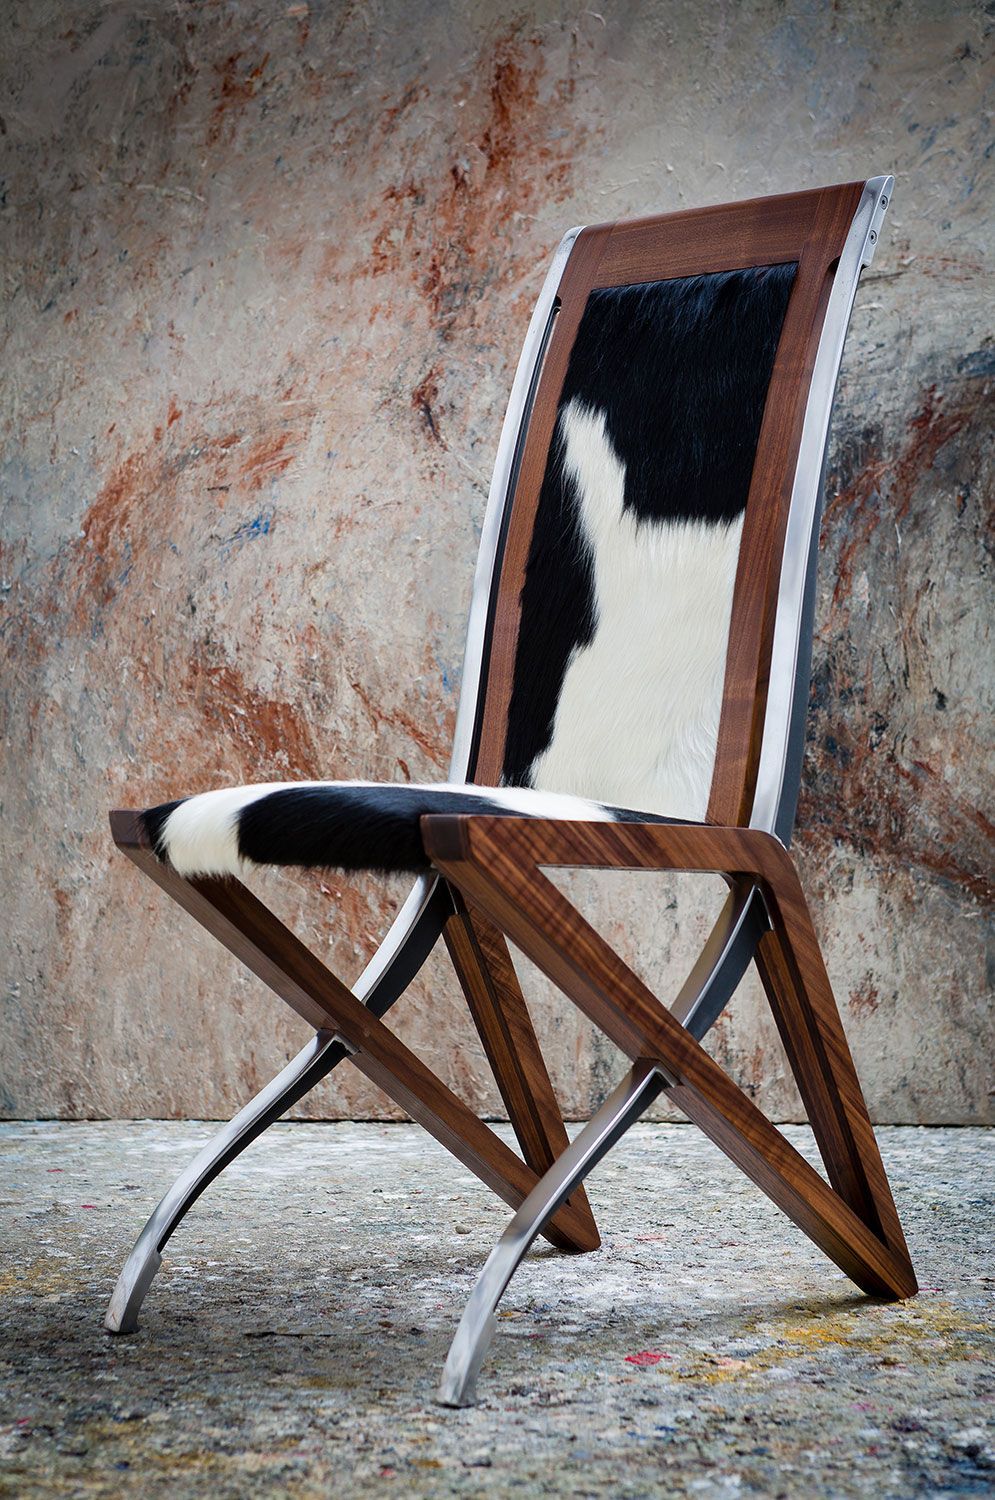 A unqiue wooden chair with a black and white cowhide seat